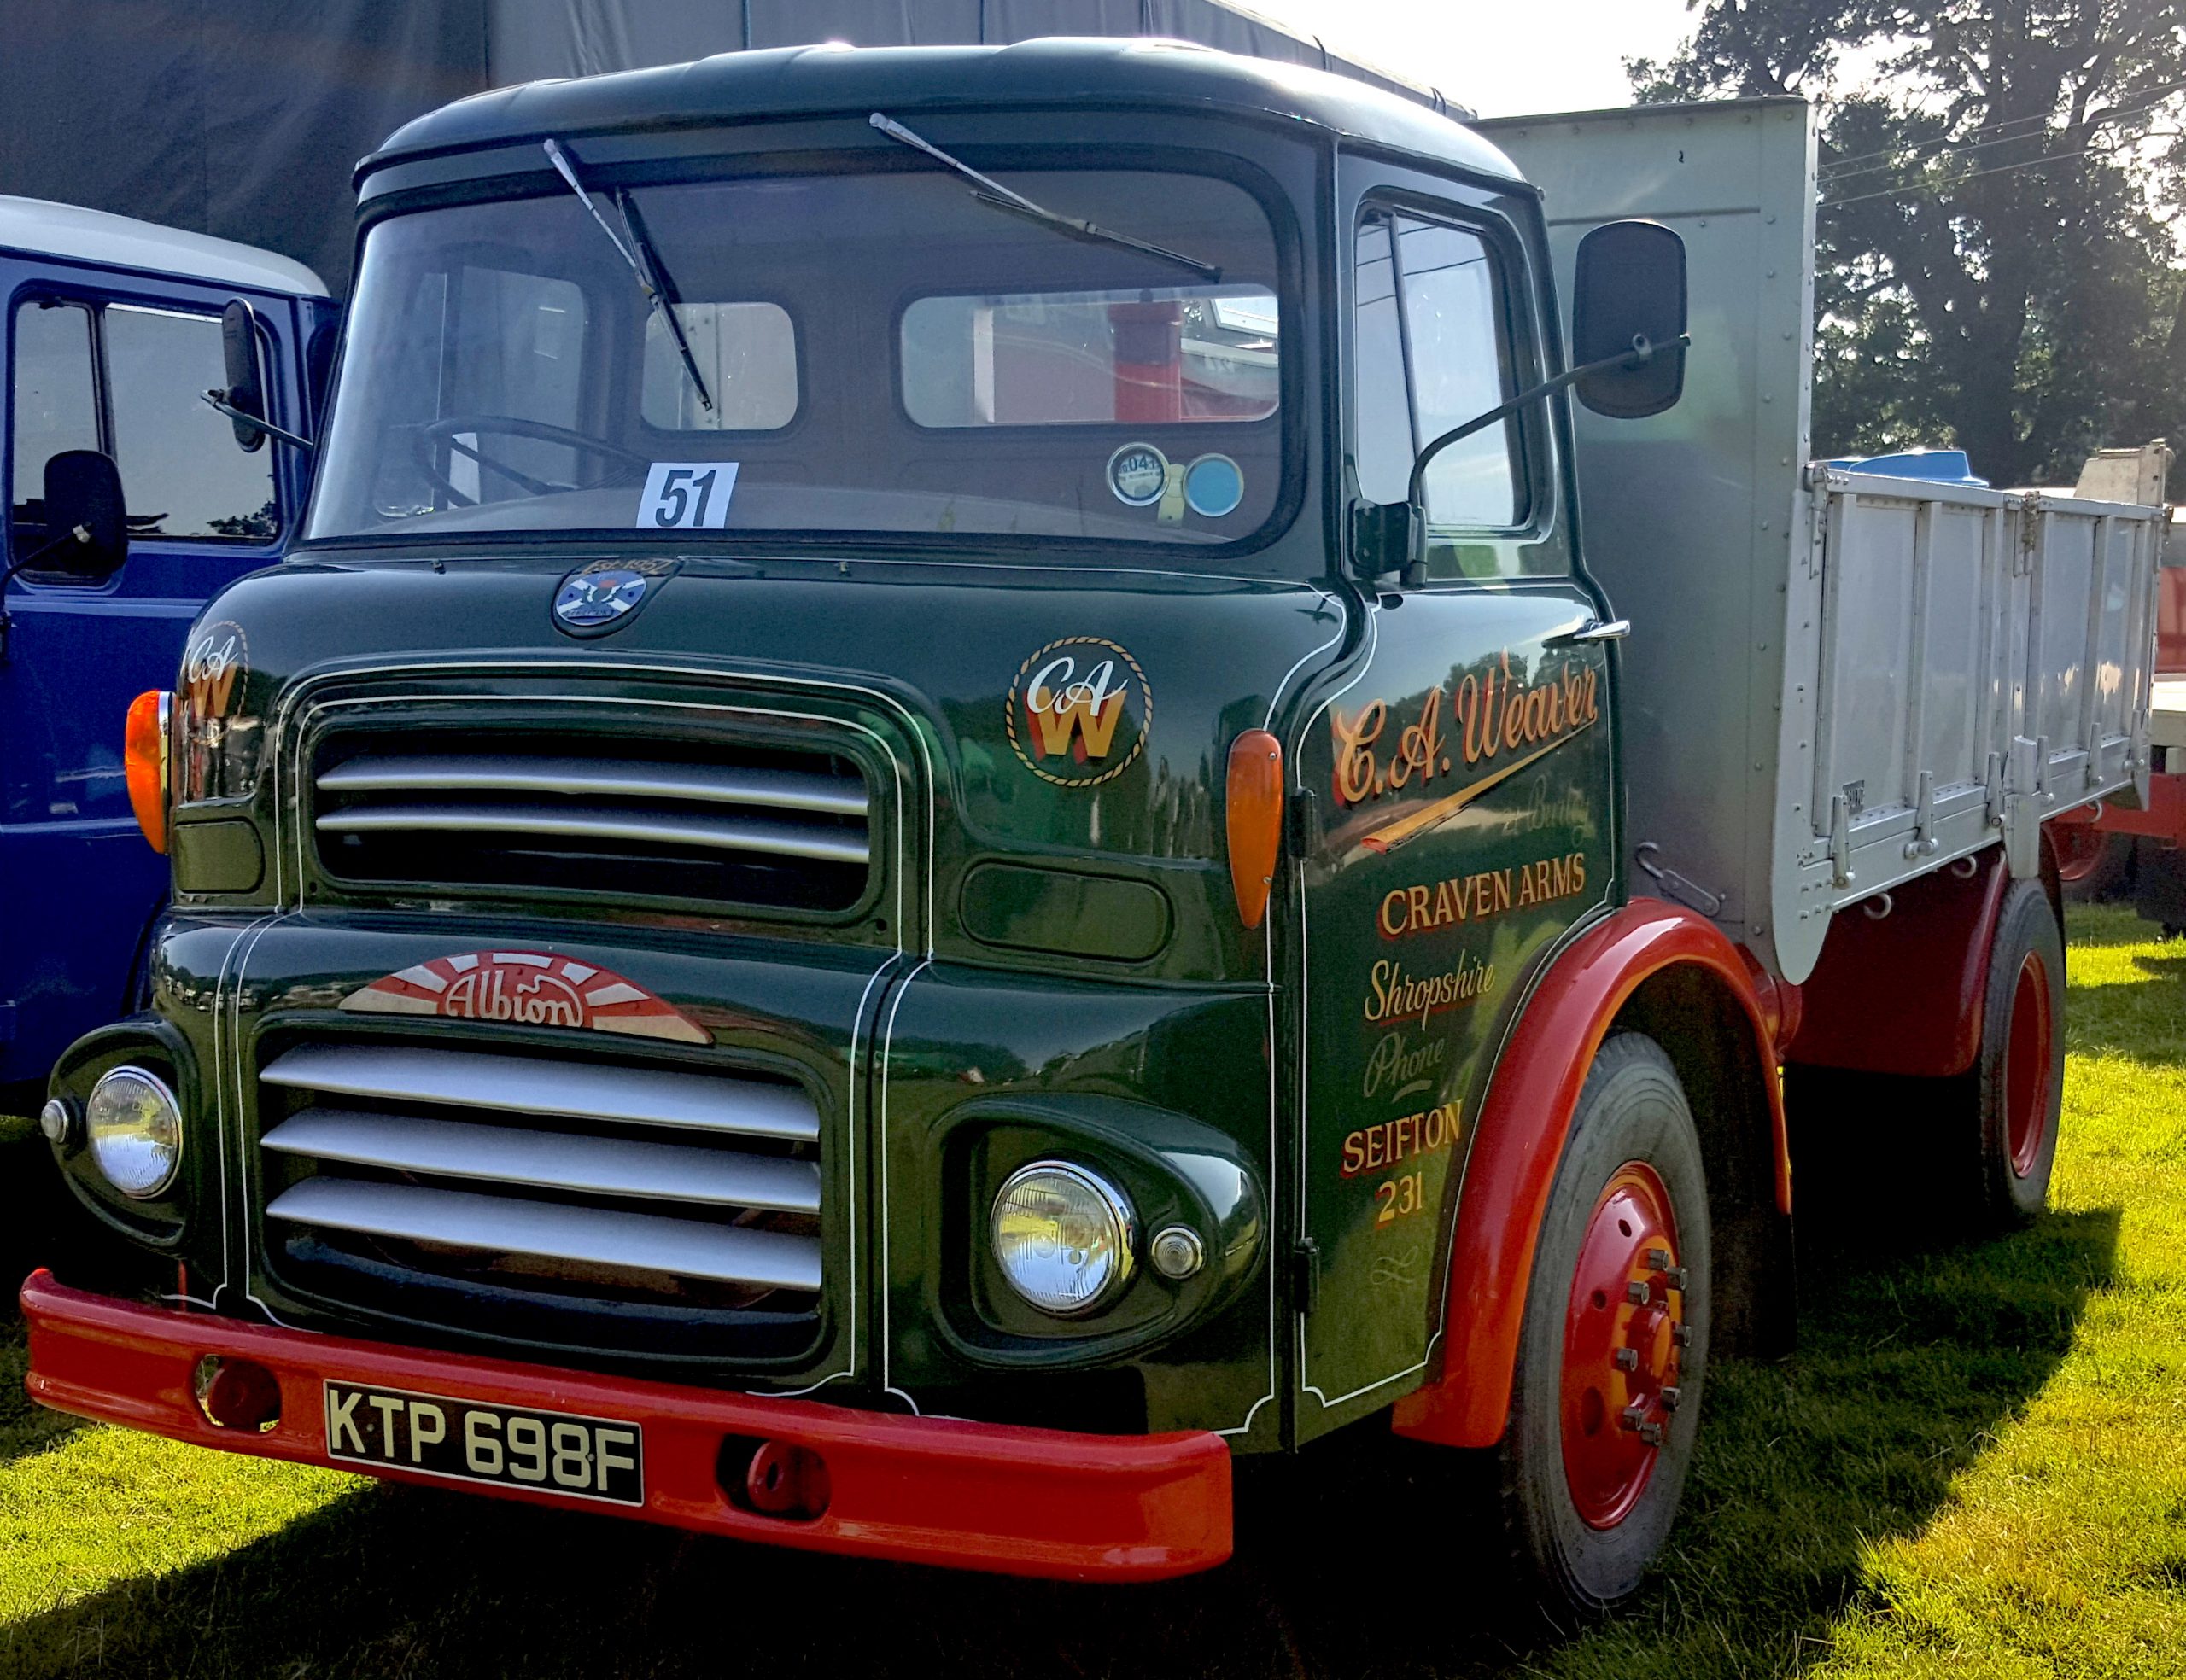 Vintage-Albion-tipper-truck-scaled